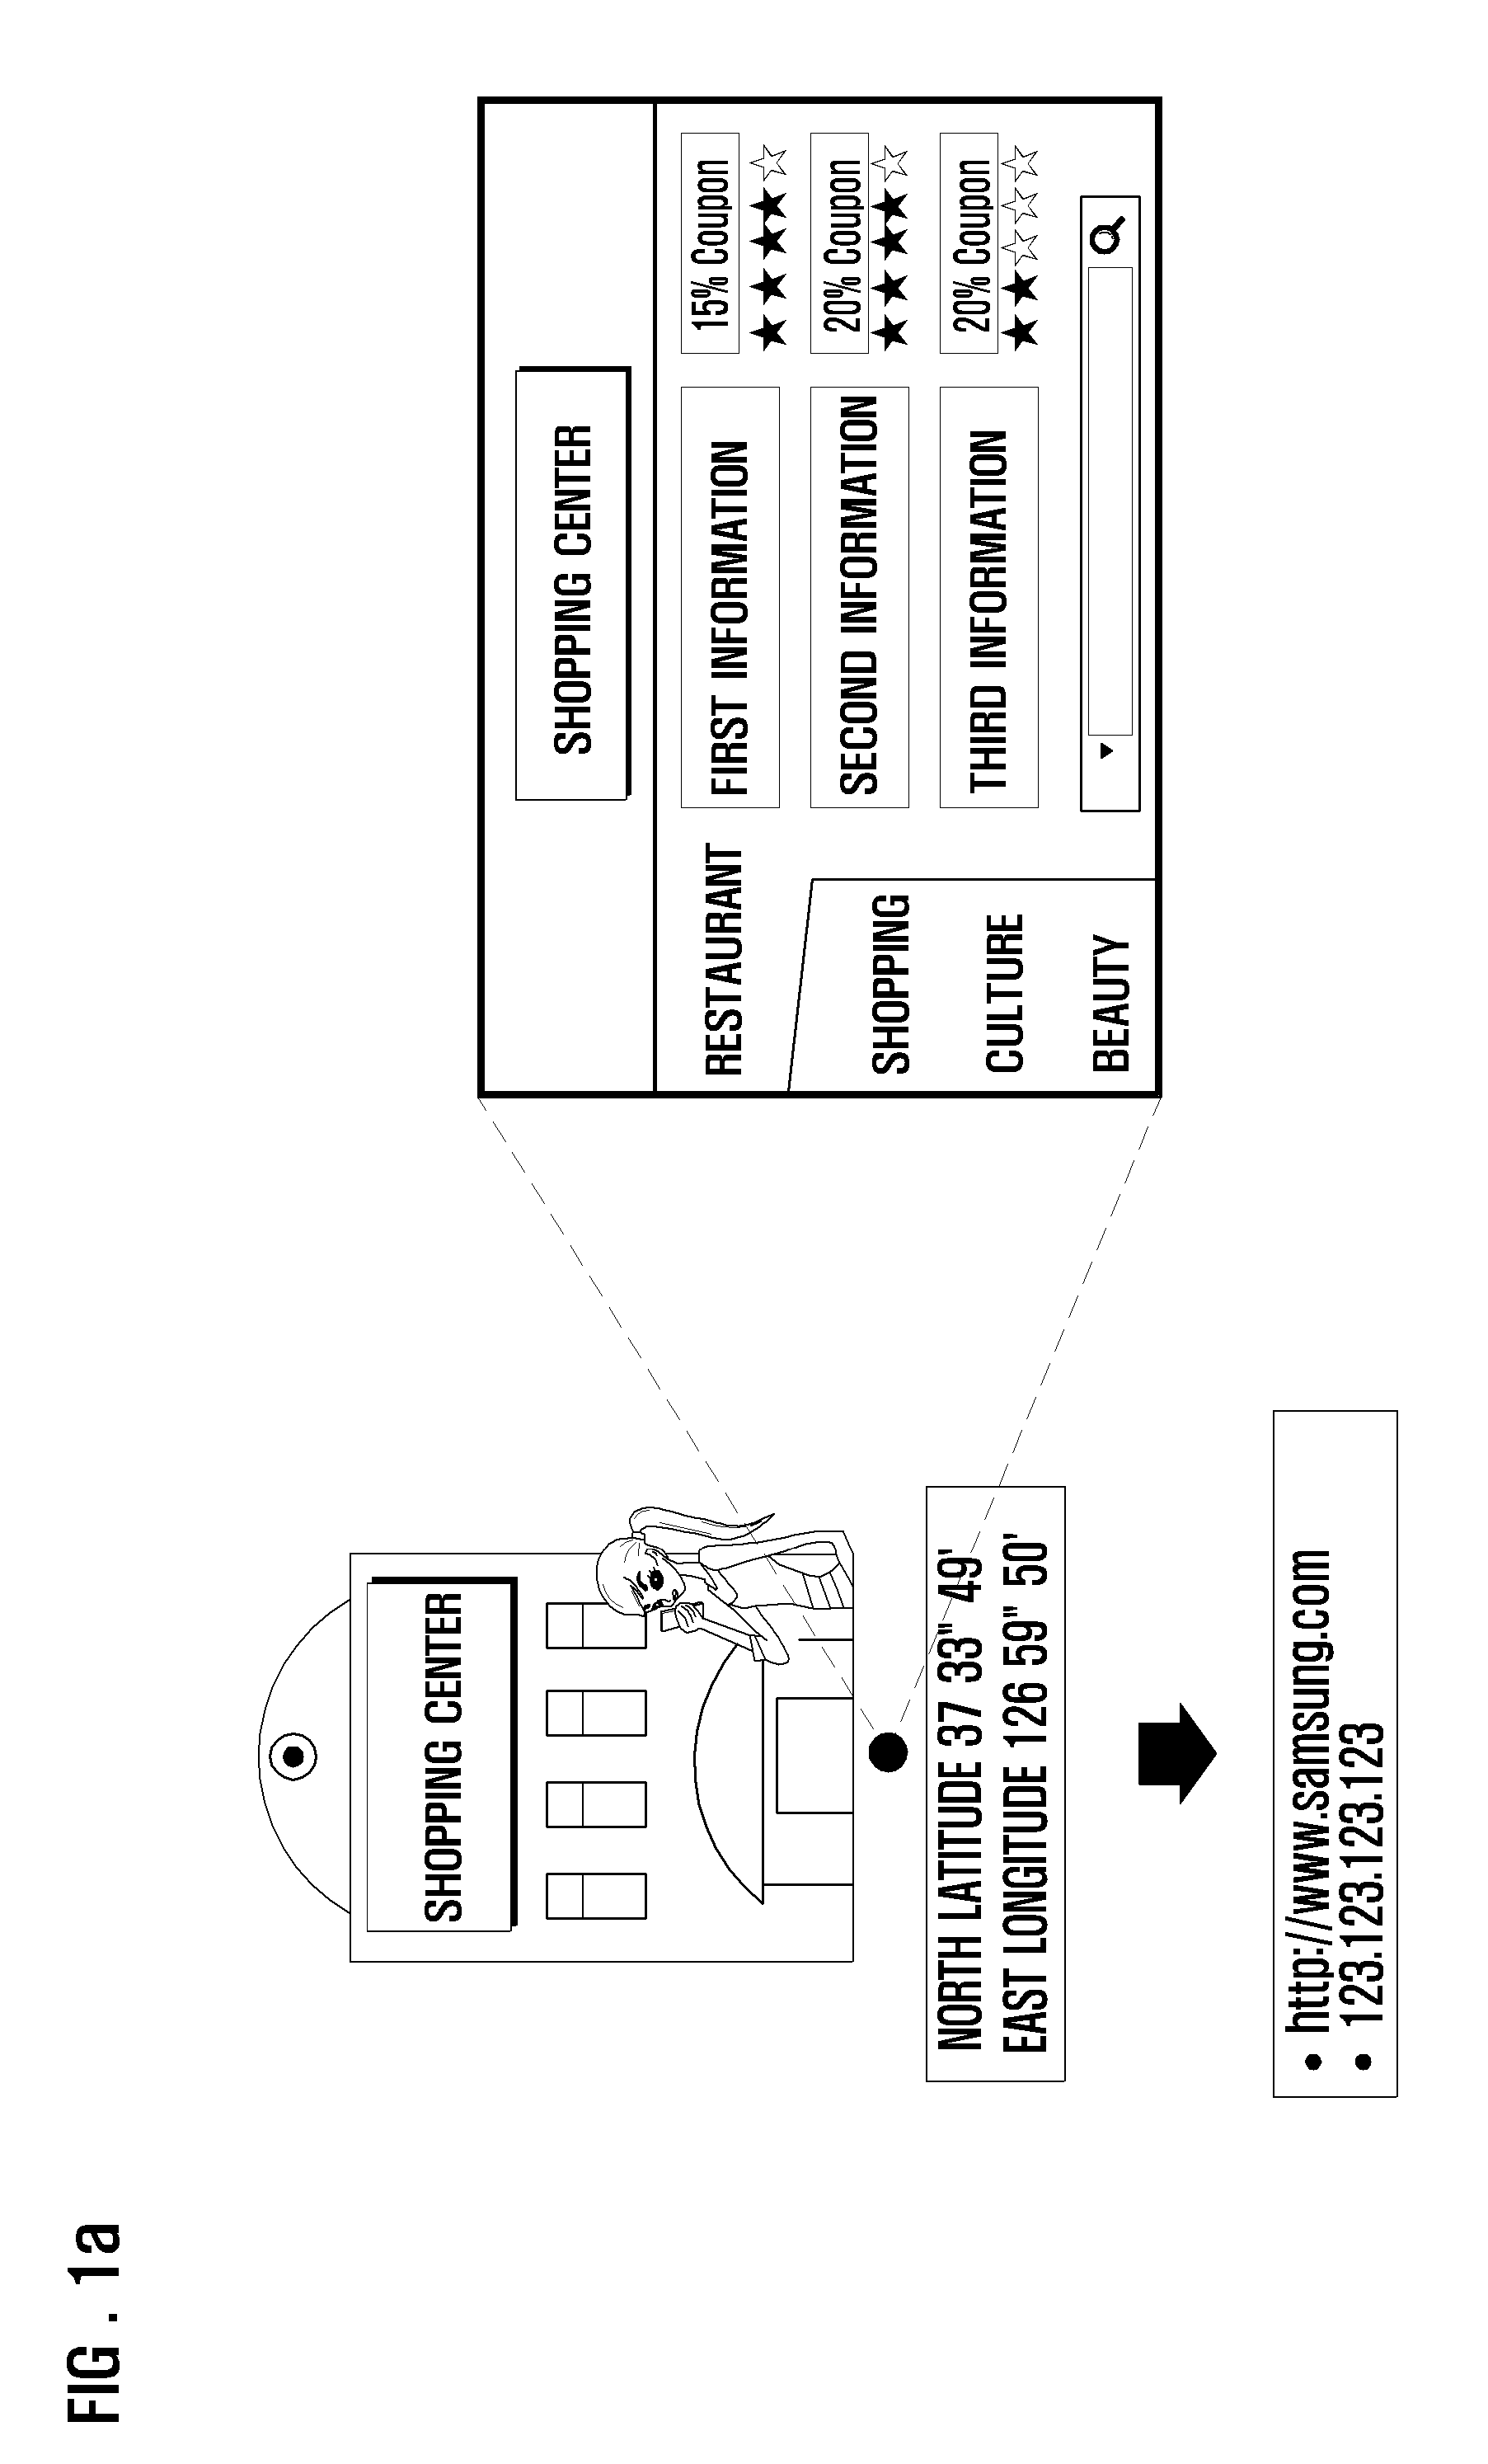 Location-based information service method and mobile terminal therefor